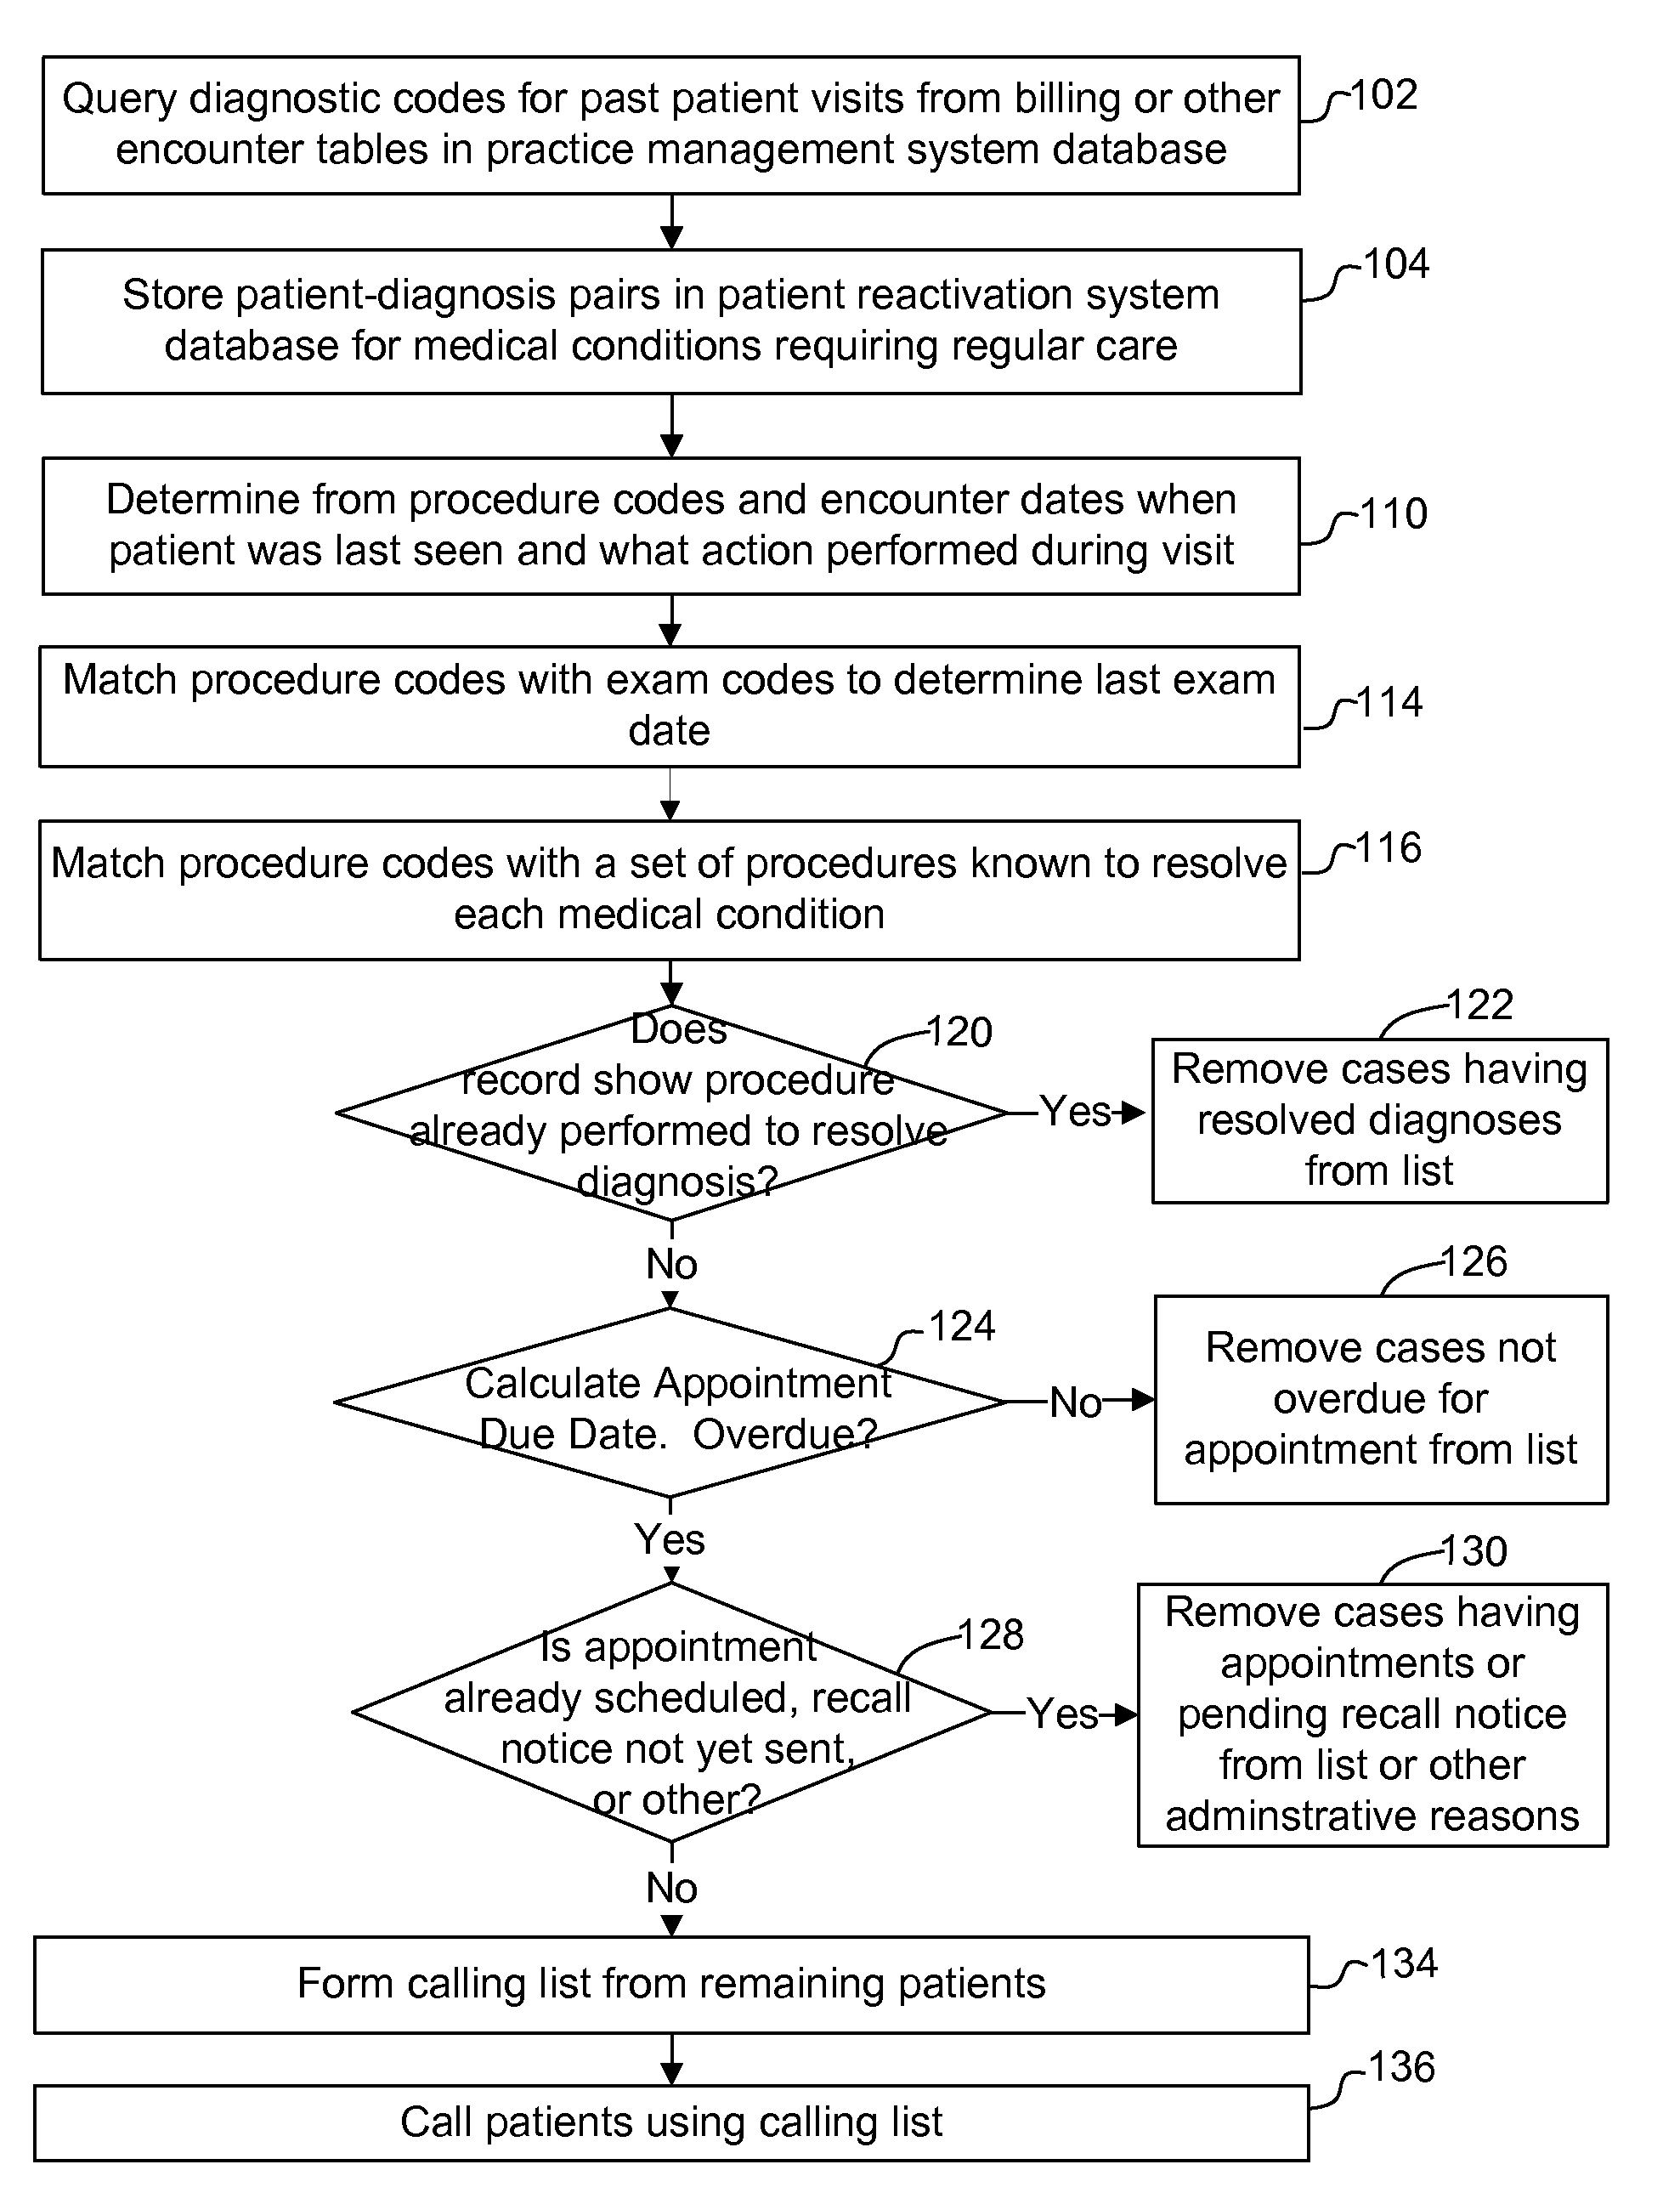 Method and apparatus for identifying patients overdue for an appointment using standard healthcare billing data